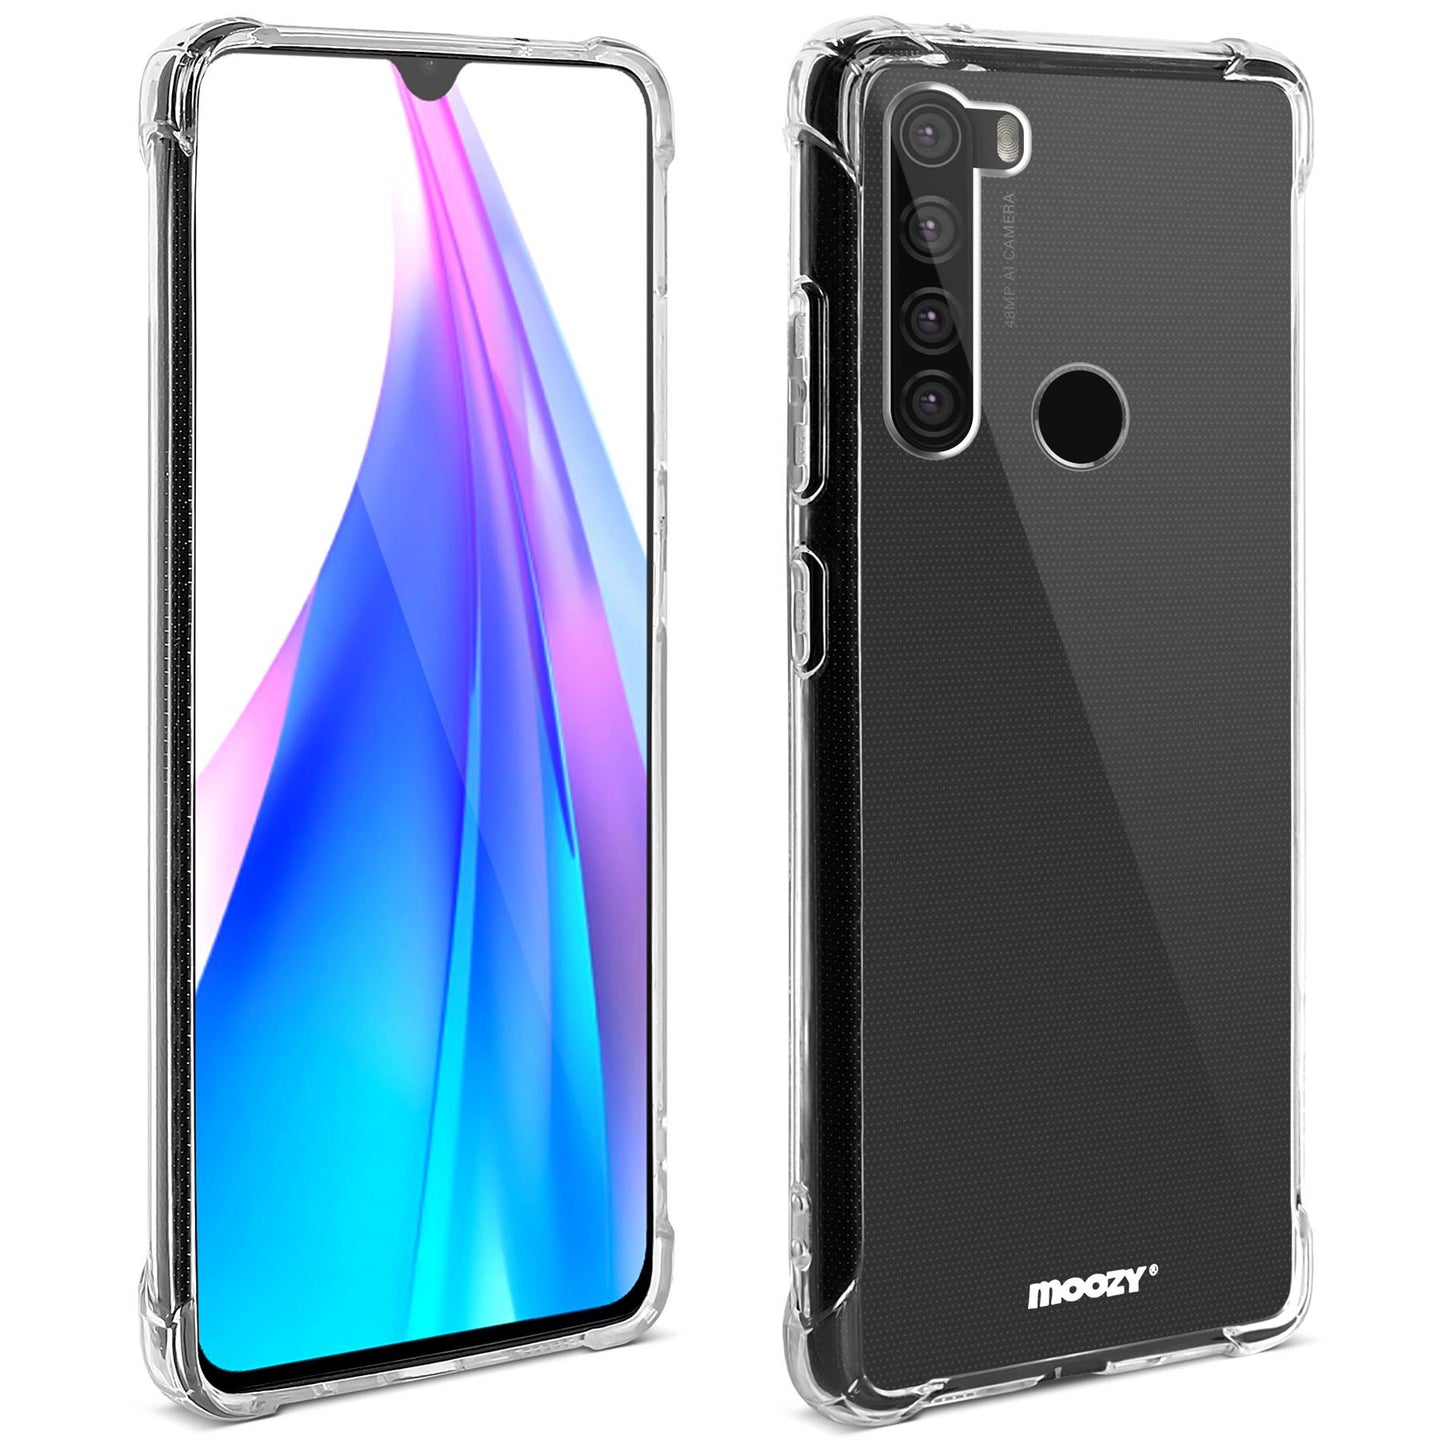 Moozy Shock Proof Silicone Case for Xiaomi Redmi Note 8T - Transparent Crystal Clear Phone Case Soft TPU Cover